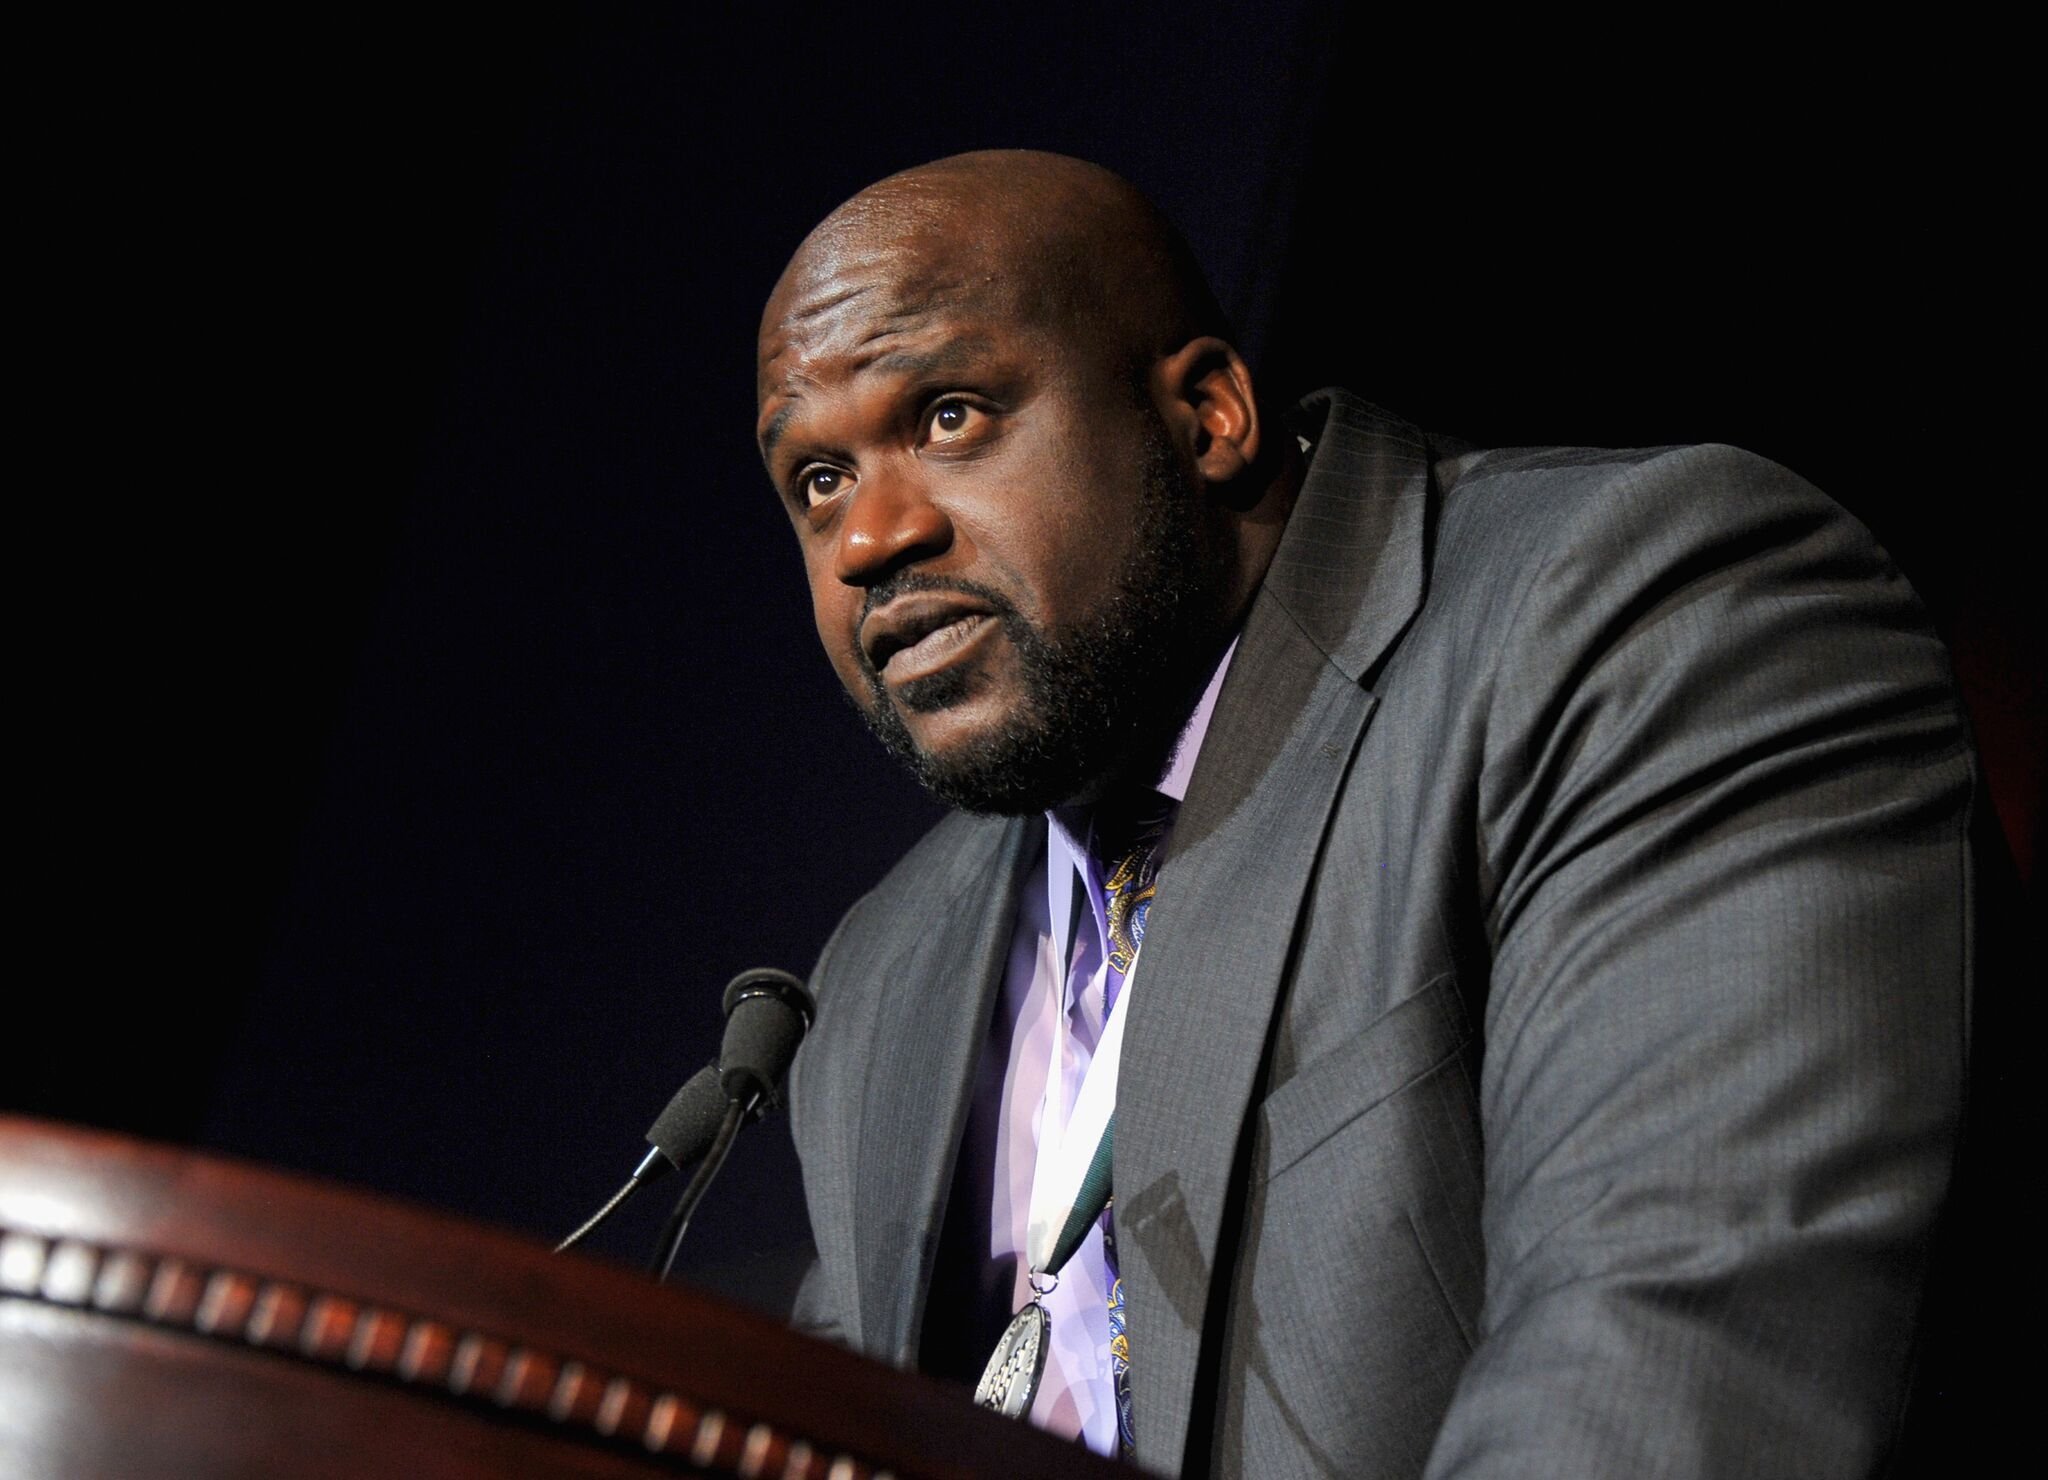  NBA basketball player Shaquille O'Neal speaks onstage at the 27th Annual Great Sports Legends Dinner to benefit the Buoniconti Fund to Cure Paralysis at The Waldorf=Astoria on September 24, 2012 | Photo: Getty Images